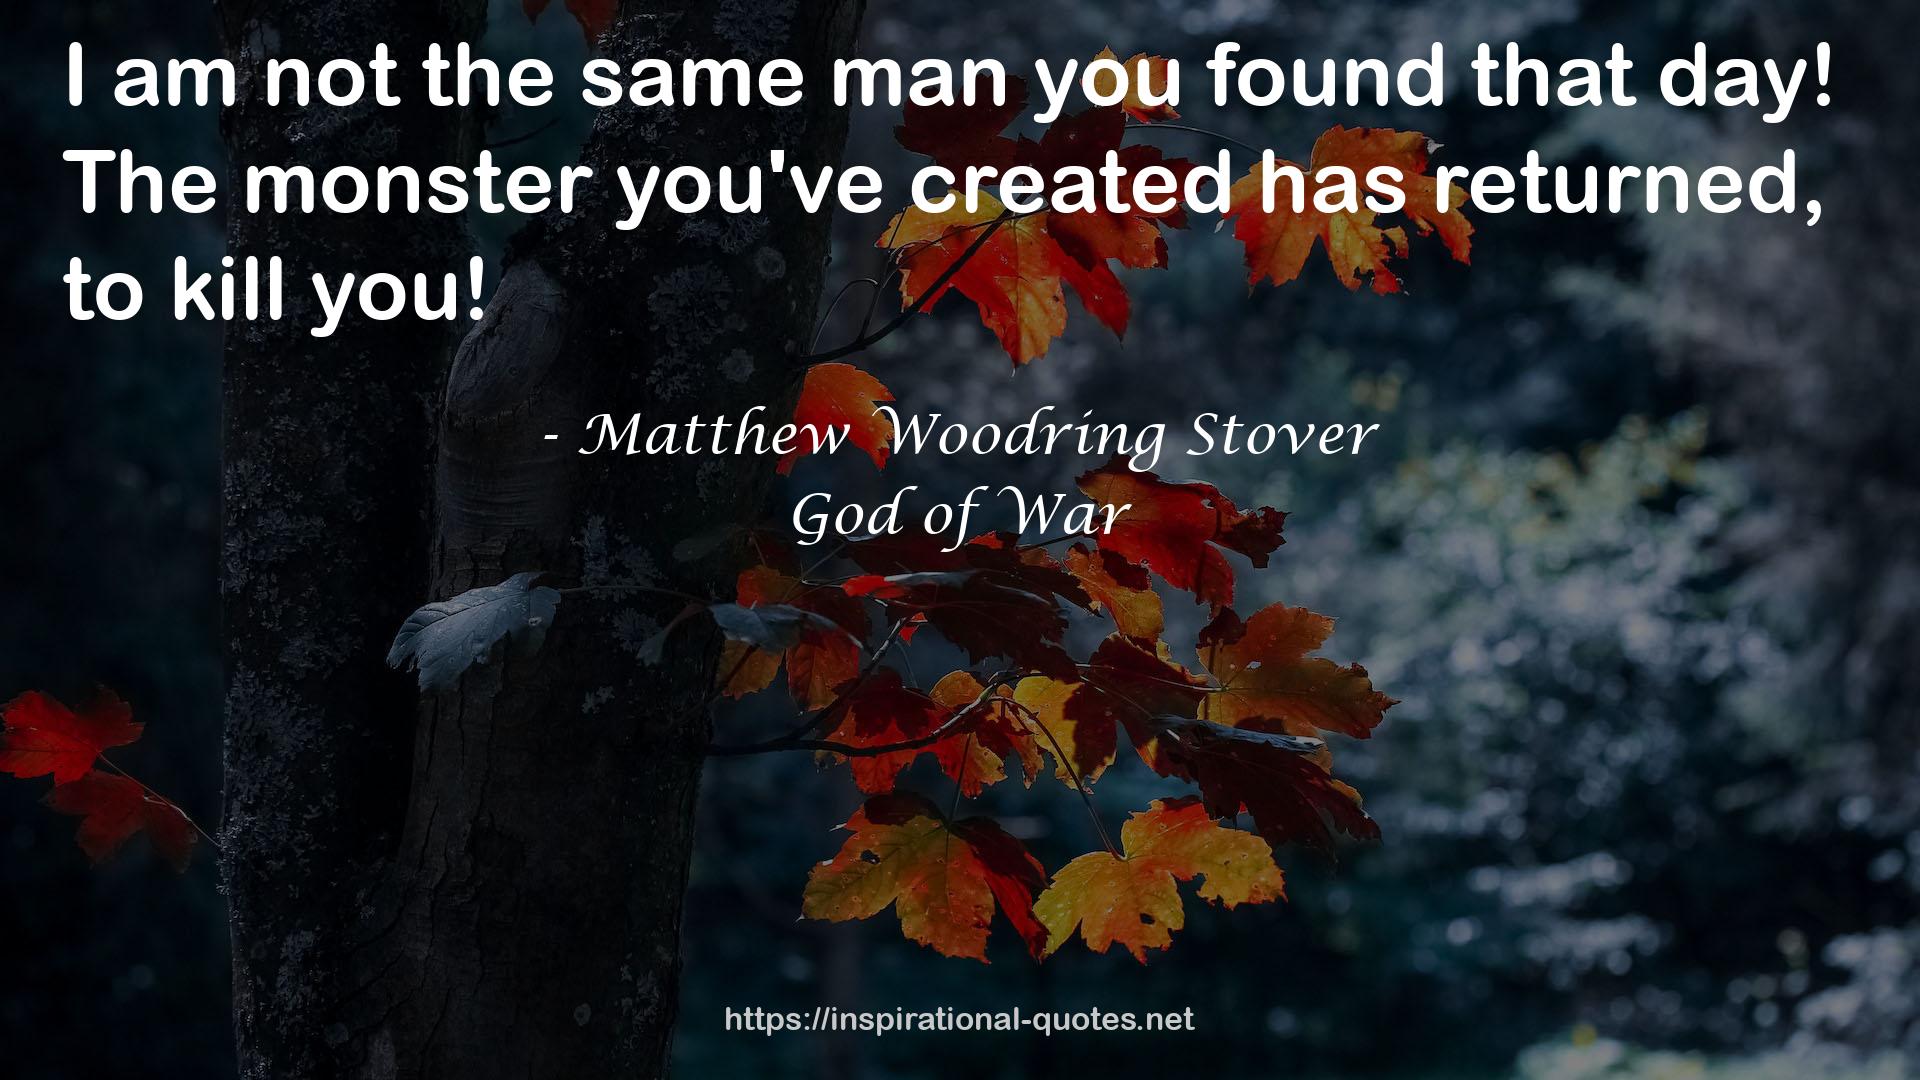 God of War QUOTES